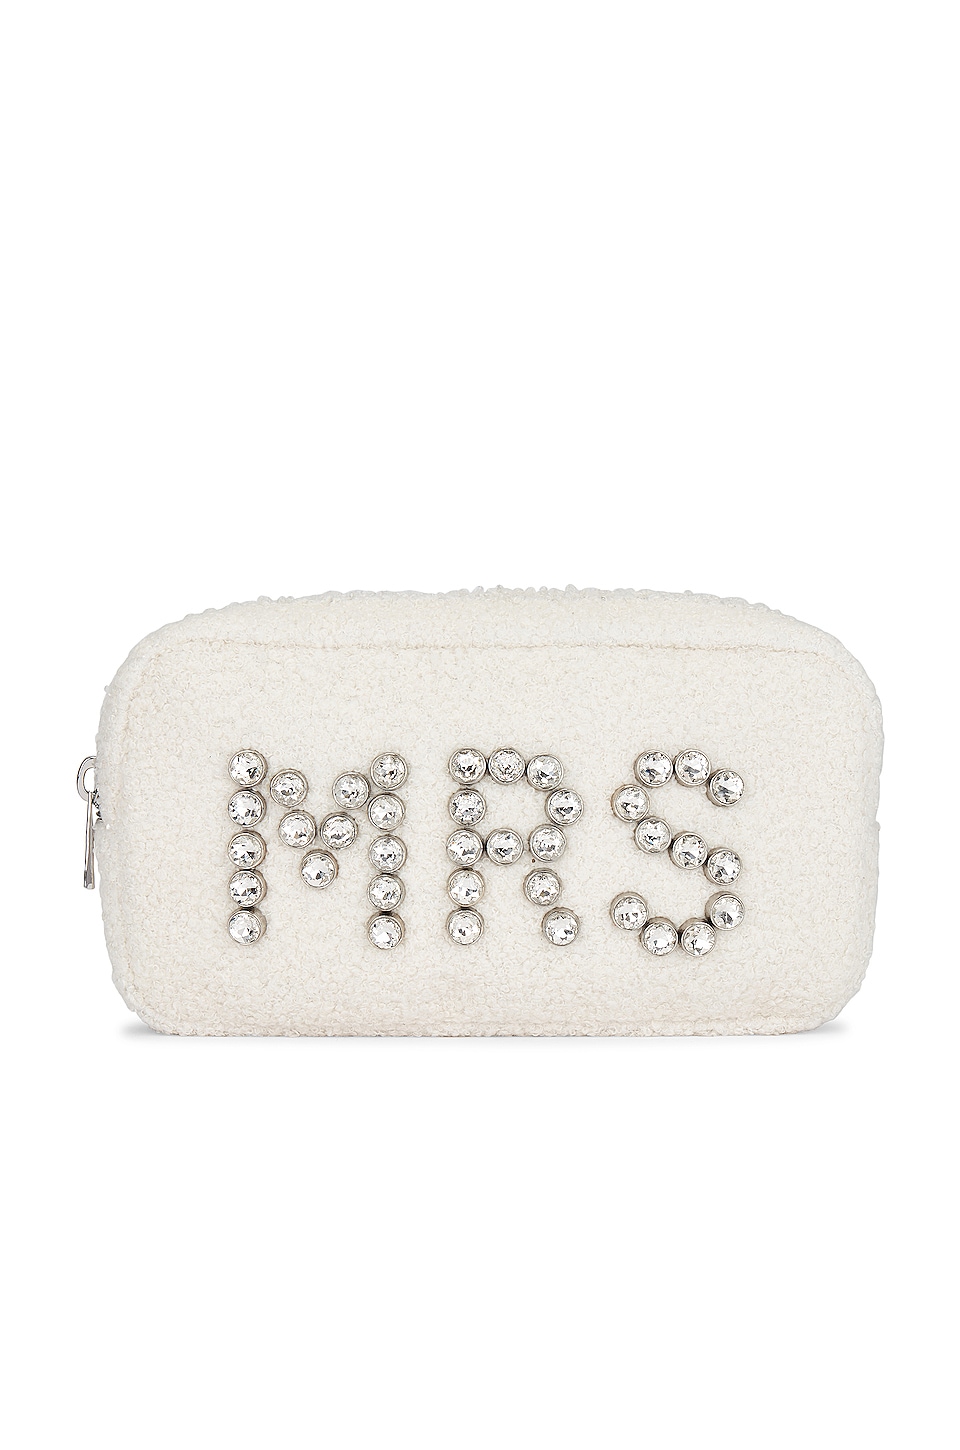 Image 1 of Mrs Crystal Cosmetic Bag in Cream